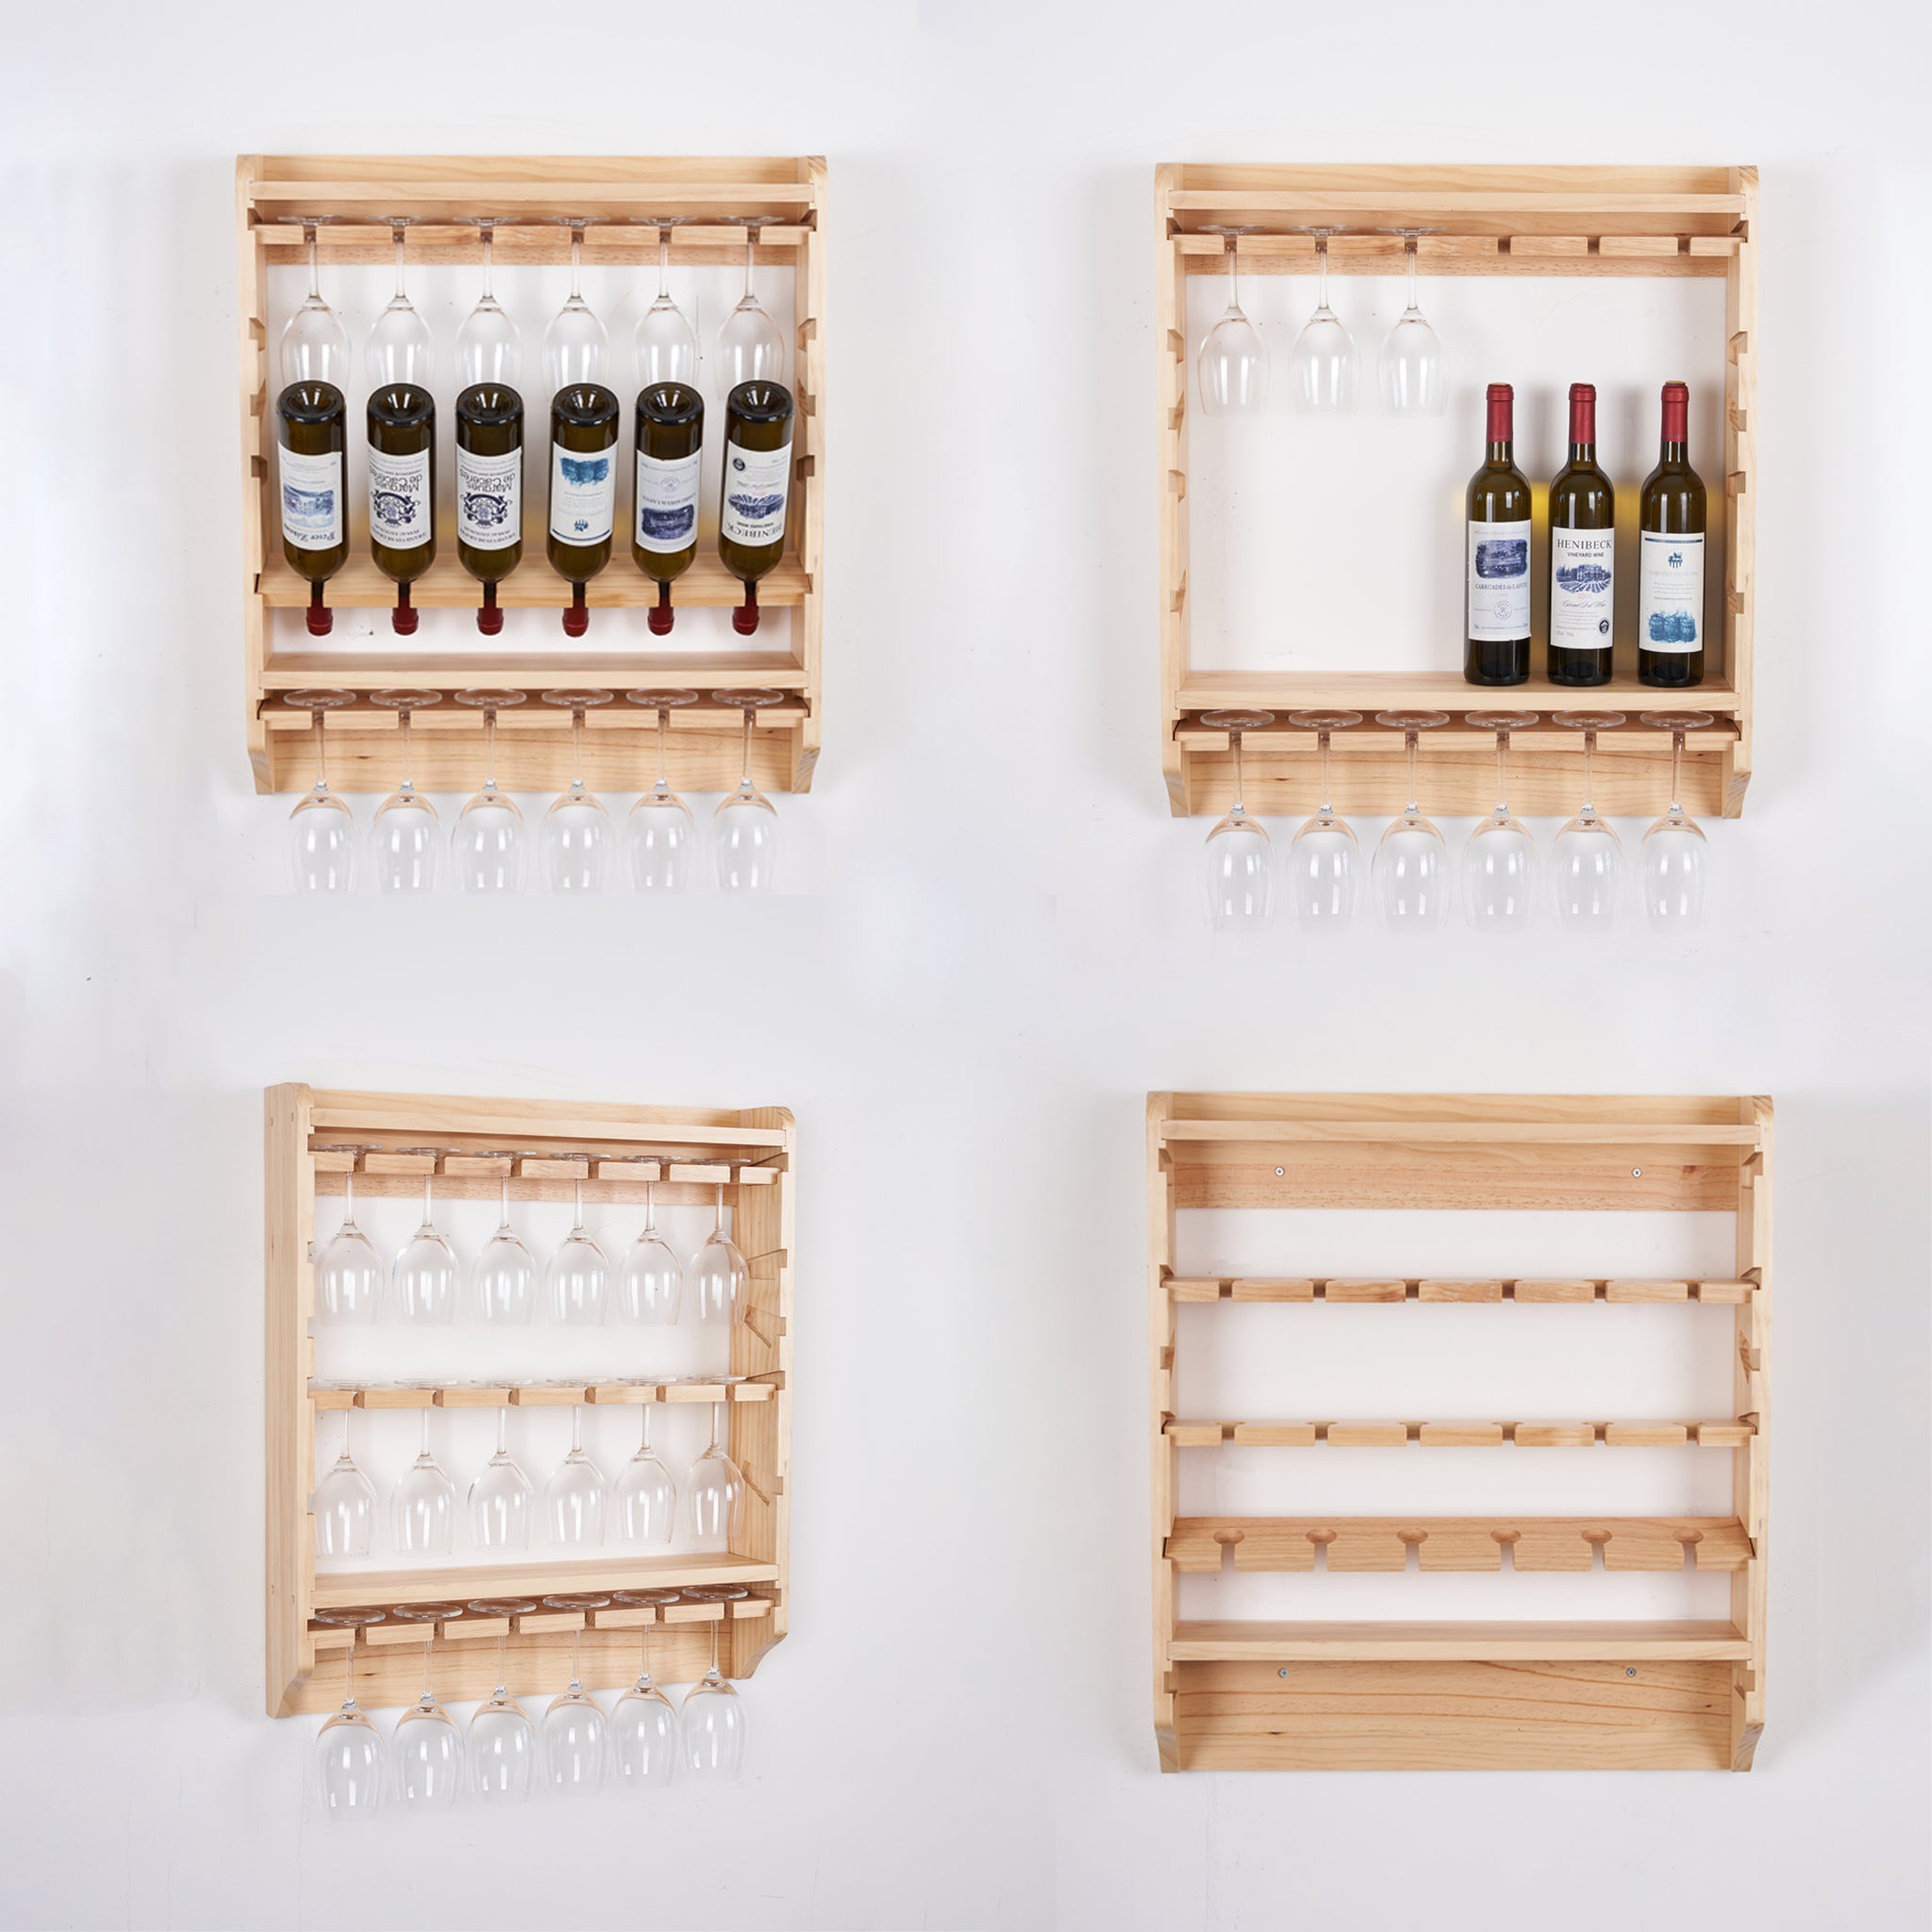 18 bottle wall wine rack wine rack with glass holder natural-kitchen-american traditional-pine-pine